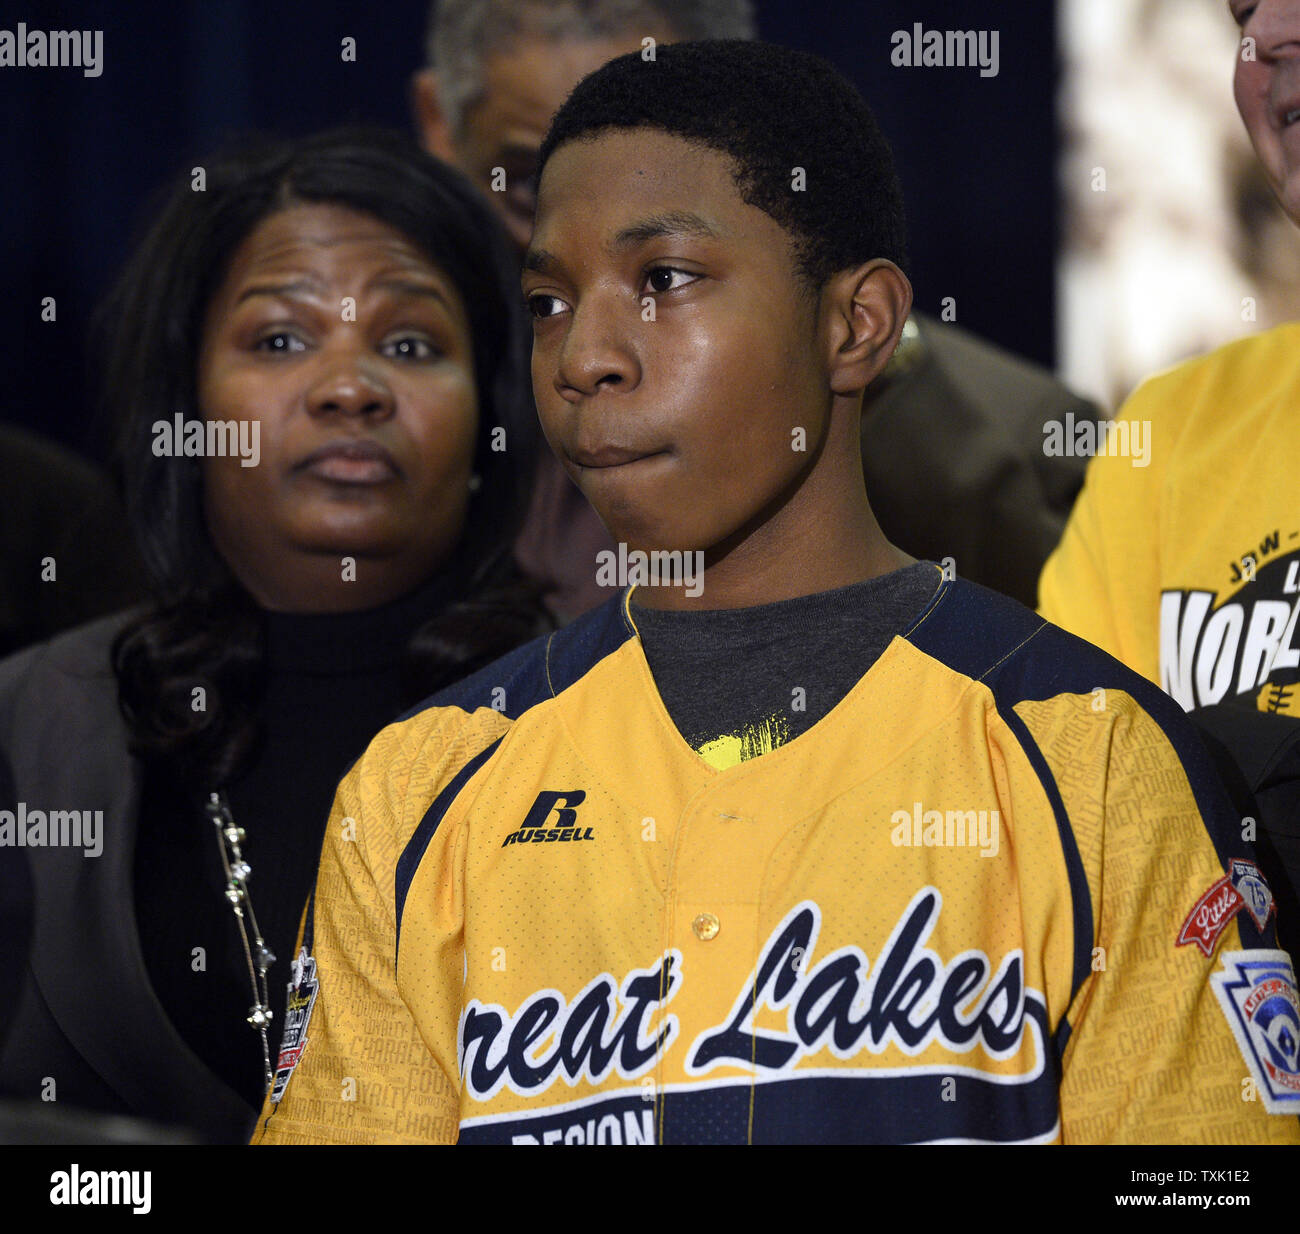 Jackie Robinson West little leaguer Brandon Green (R) stands with his mother Venisa at his side during a news conference at Operation Push Headquarters on February 11, 2015 in Chicago. Little League Baseball announced Wednesday that Jackie Robinson West used a falsified boundary map to claim players from other districts and must vacate wins from the 2014 Little League Baseball International Tournament, including its Great Lakes Regional and United States championships. Rev. Jesse Jackson and Rev. Michael Pfleger alleged that Jackie Robinson West faced unequal scrutiny as the only all-African A Stock Photo